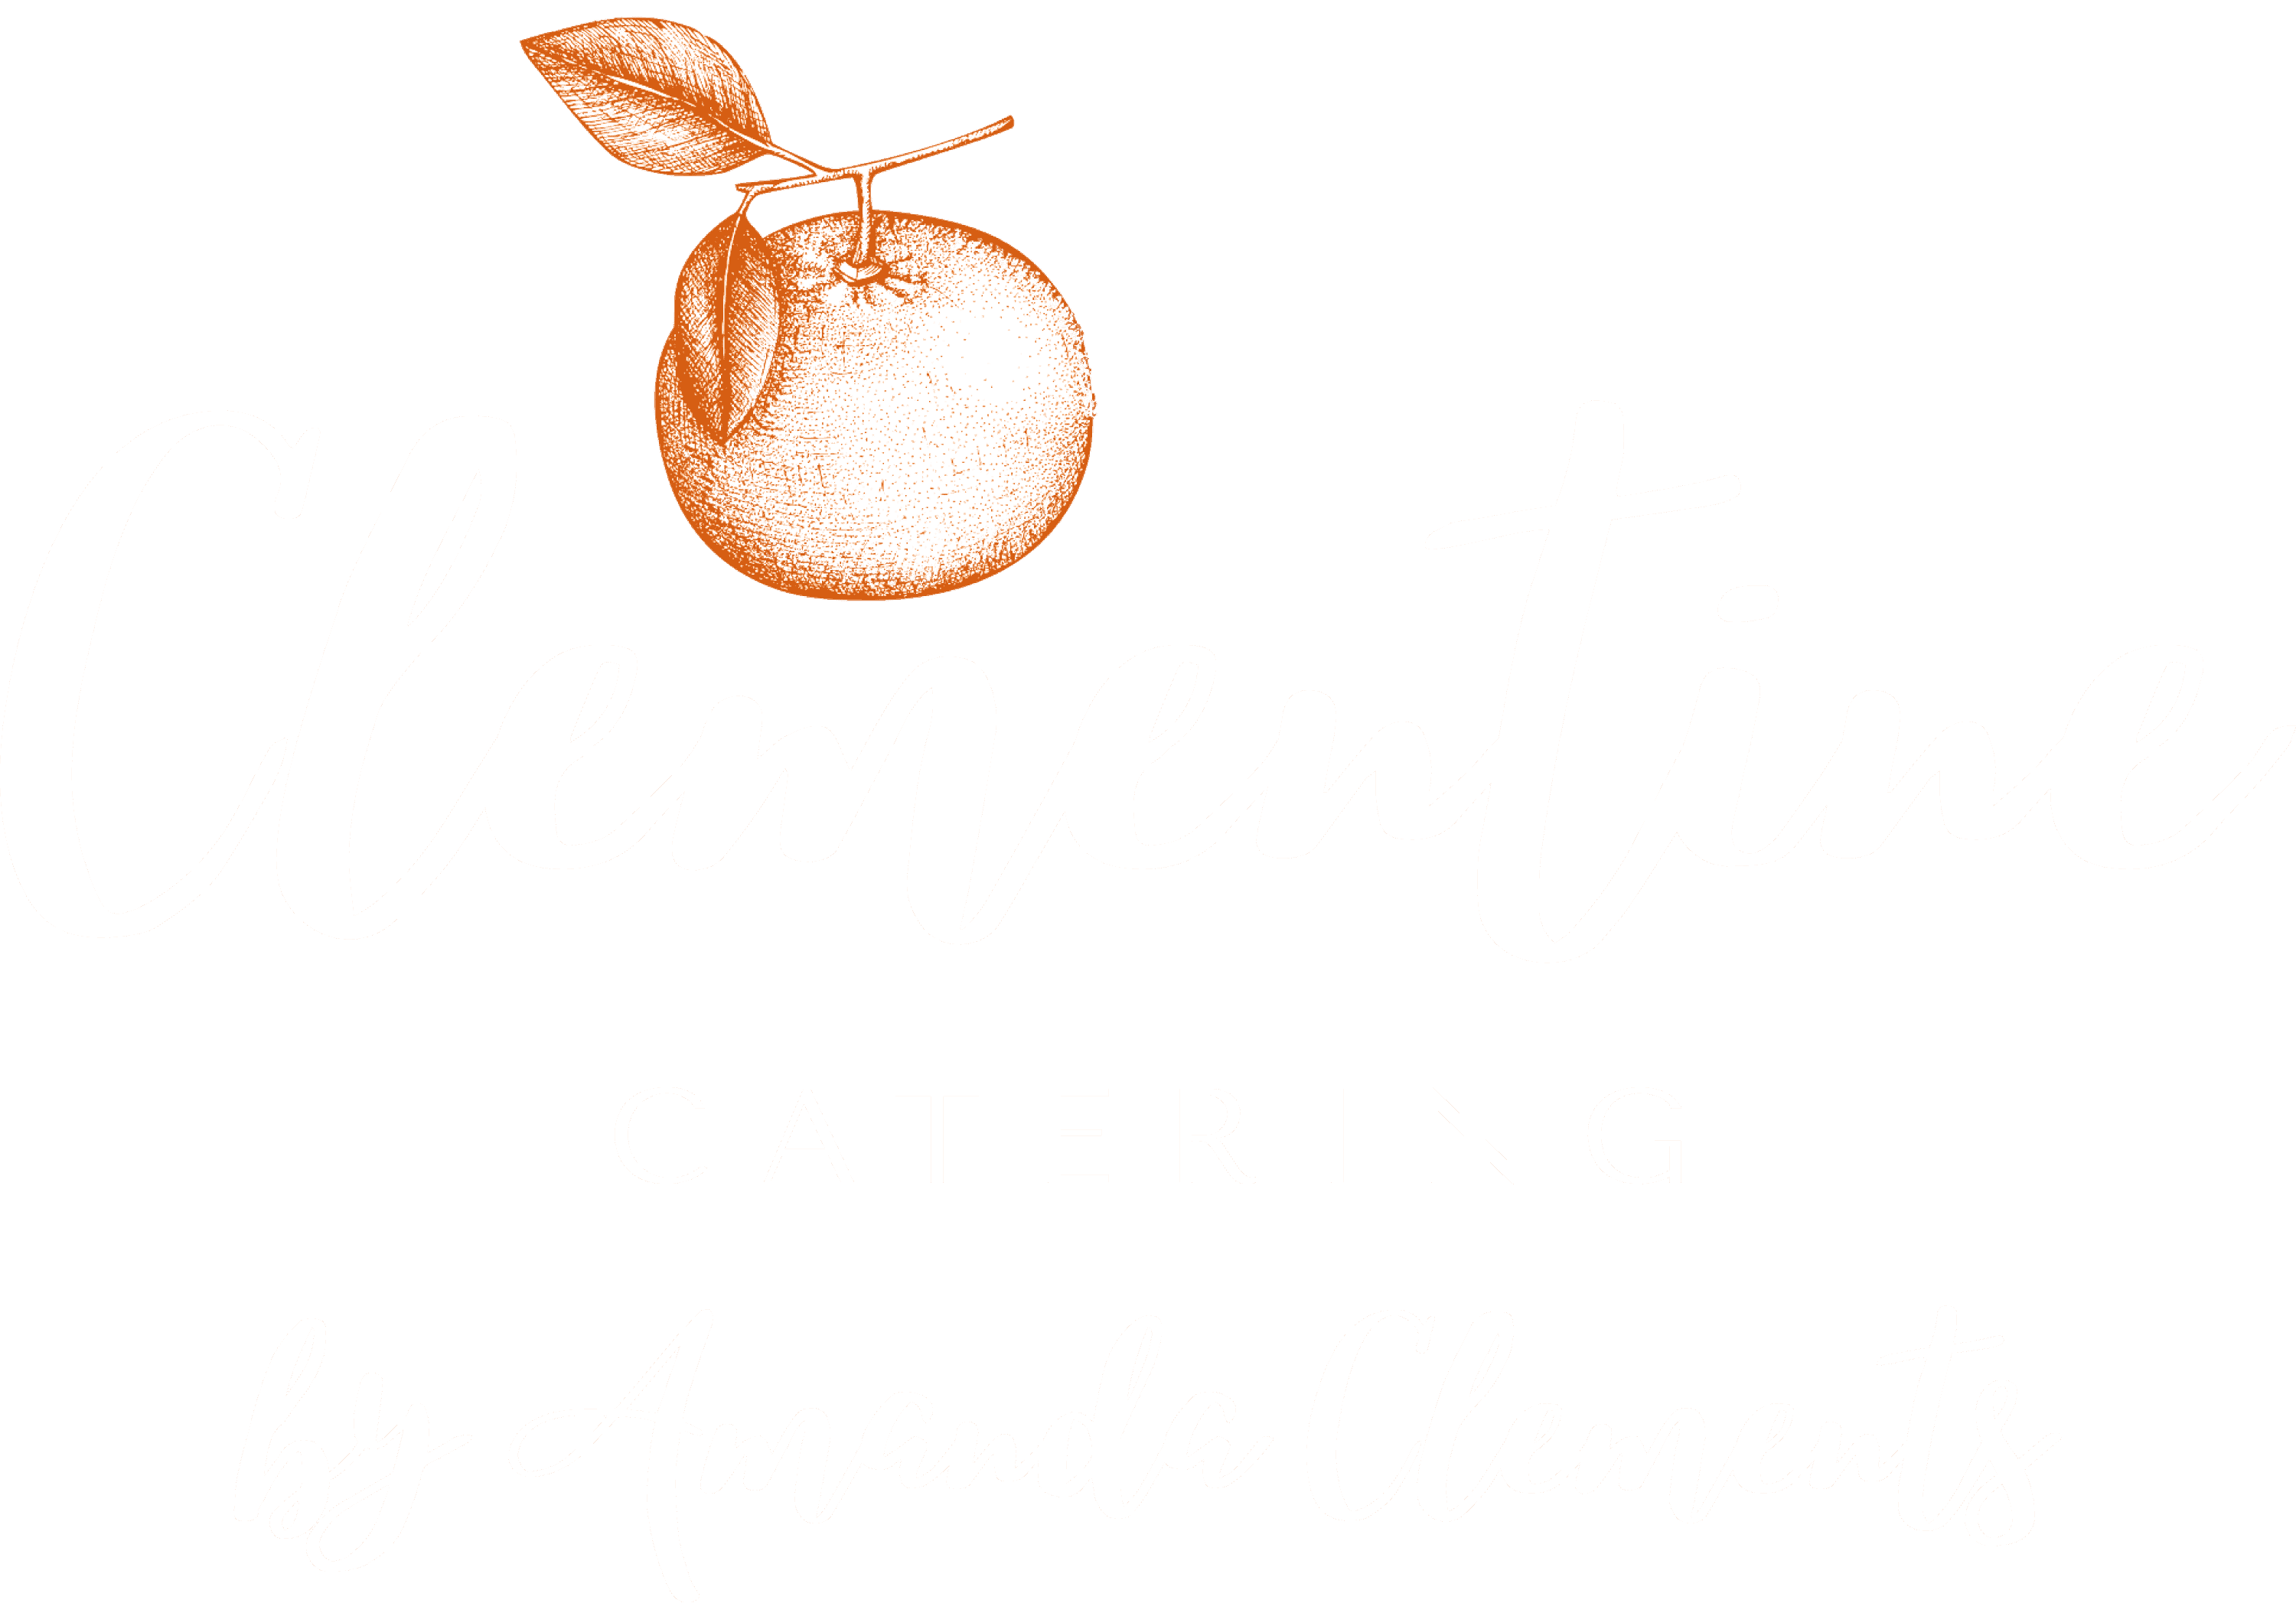 Clementine Catering Logo